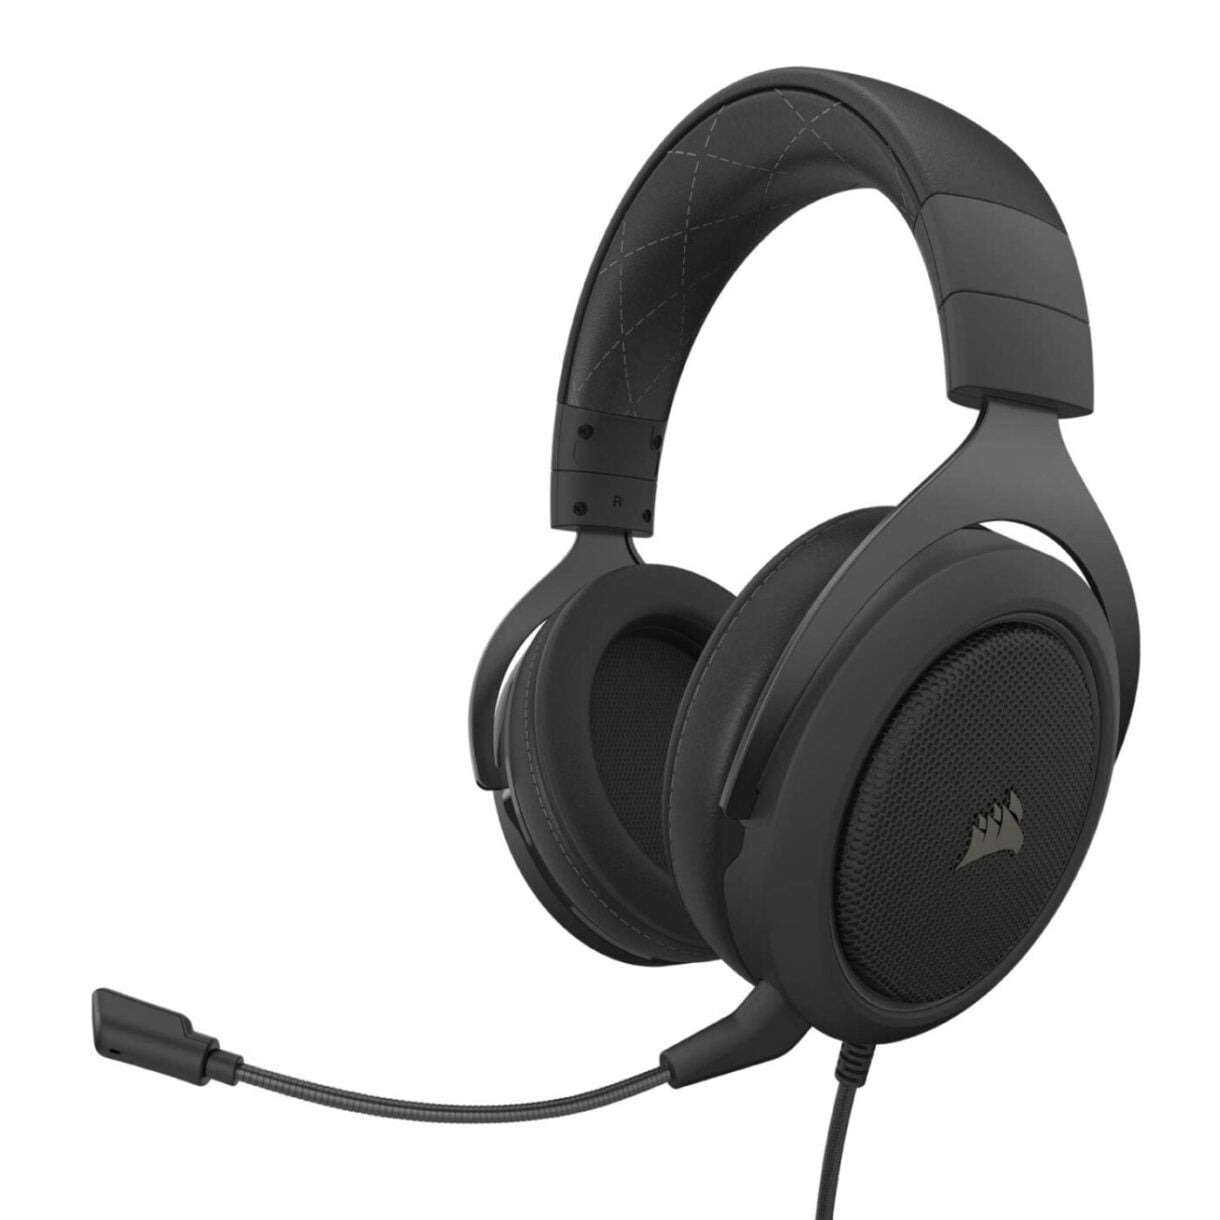 Corsair HS60 PRO - 7.1 Virtual Surround Sound Gaming Headset with USB DAC - Discord Certified